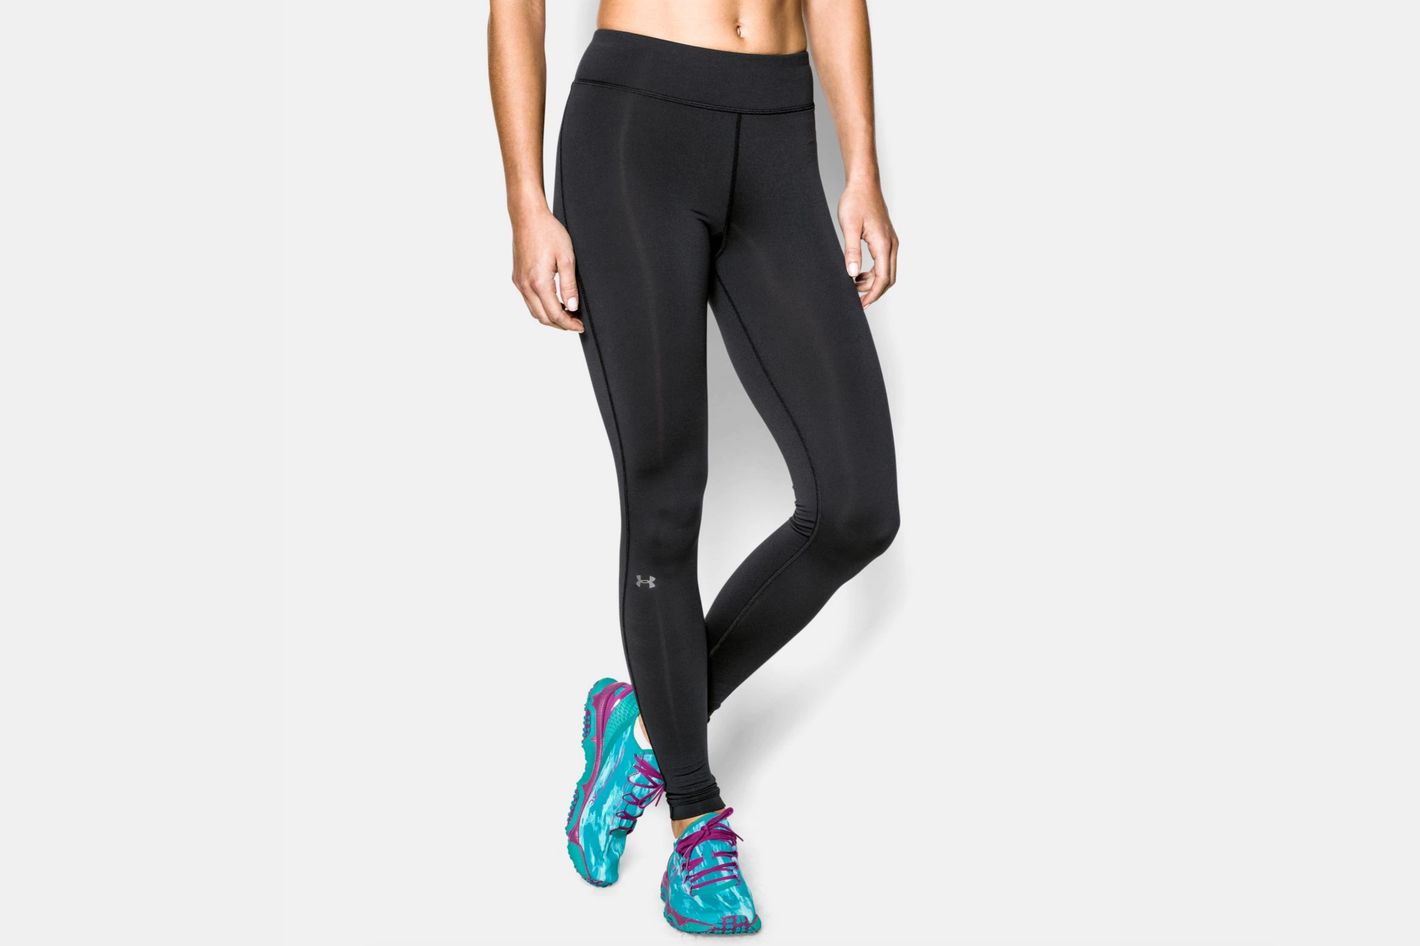 Tracksmith Running Tights Review 2018